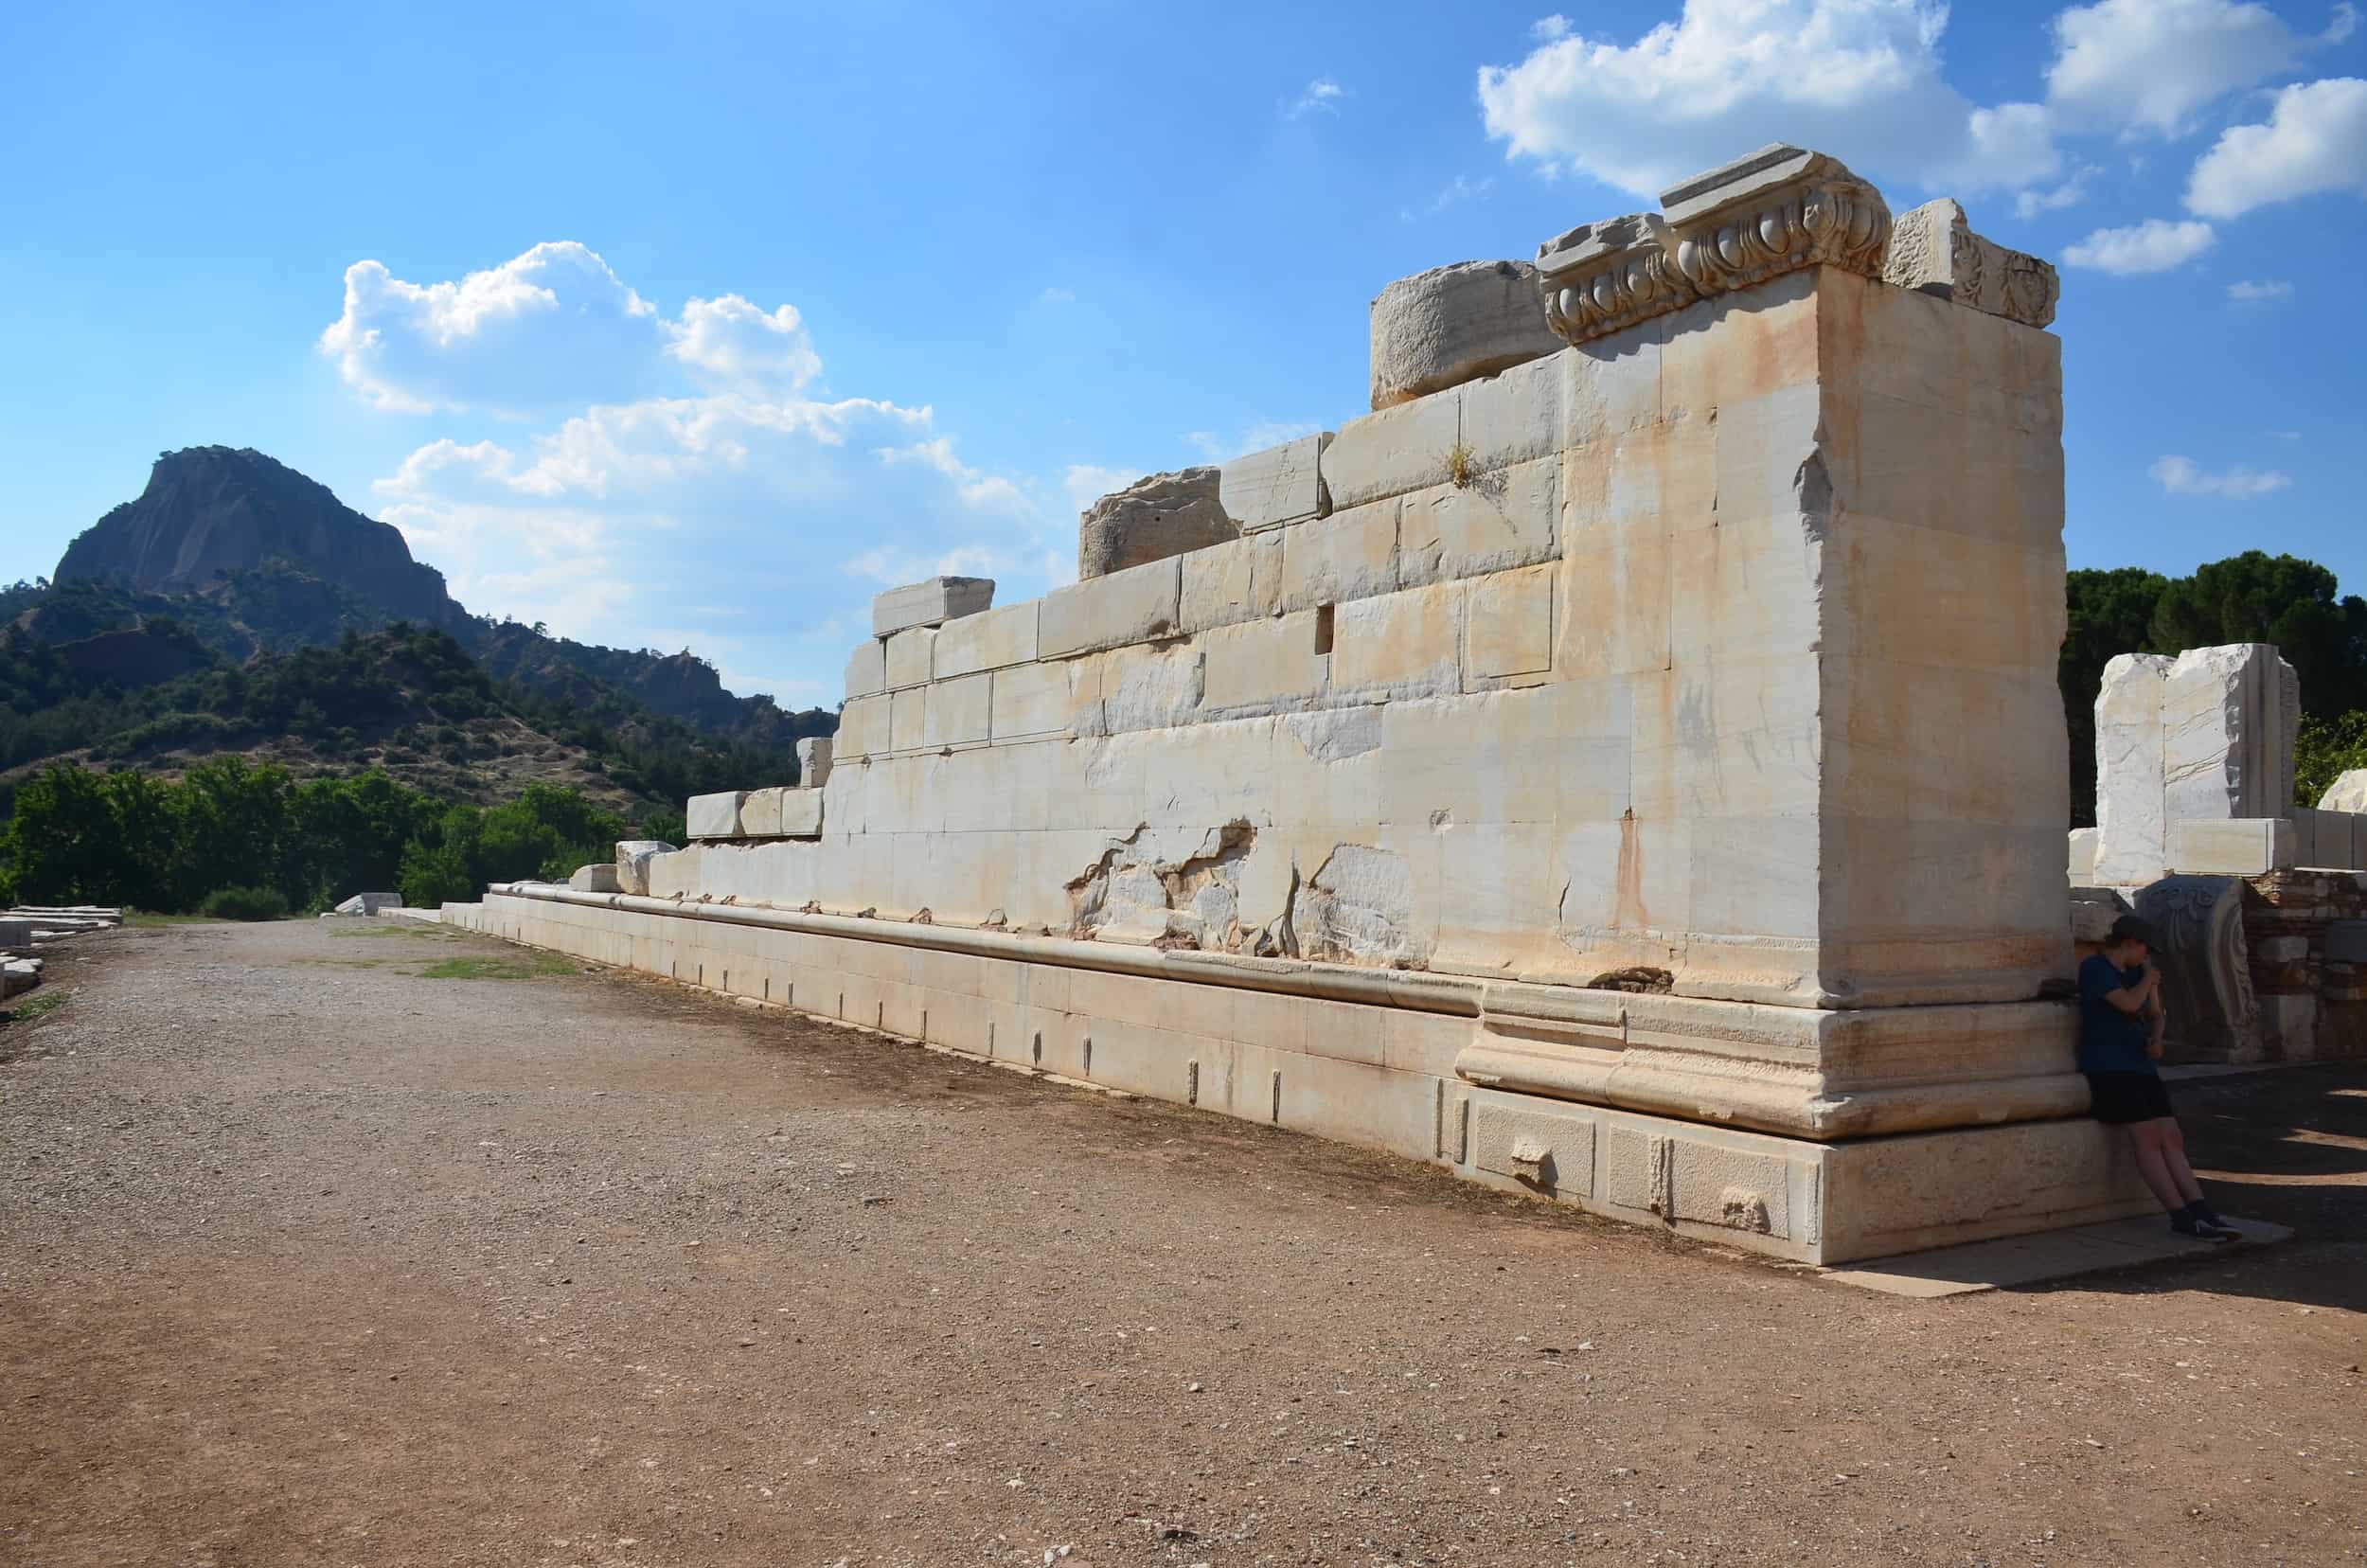 South wall of the Temple of Artemis